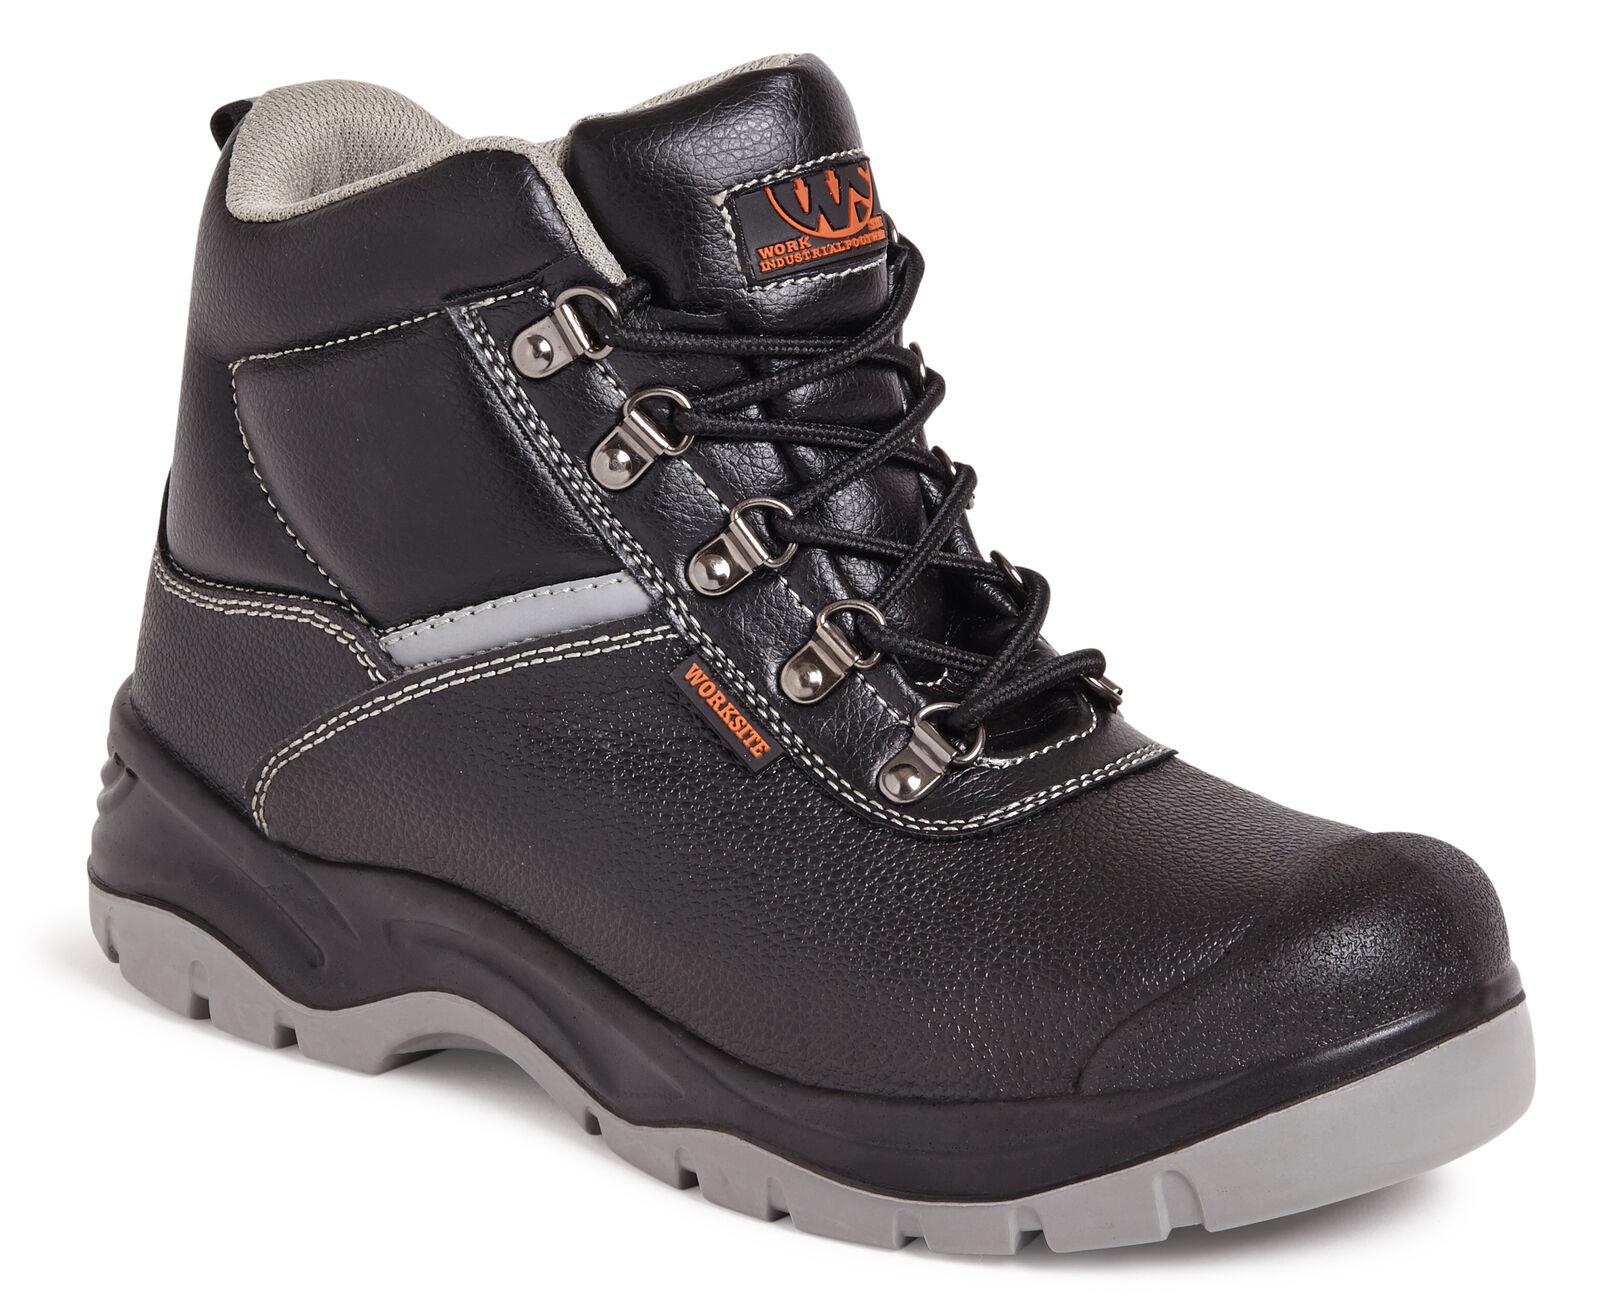 Worksite All Terrain S3 black leather steel toe/midsole water resistant safety work boot #SS609SM